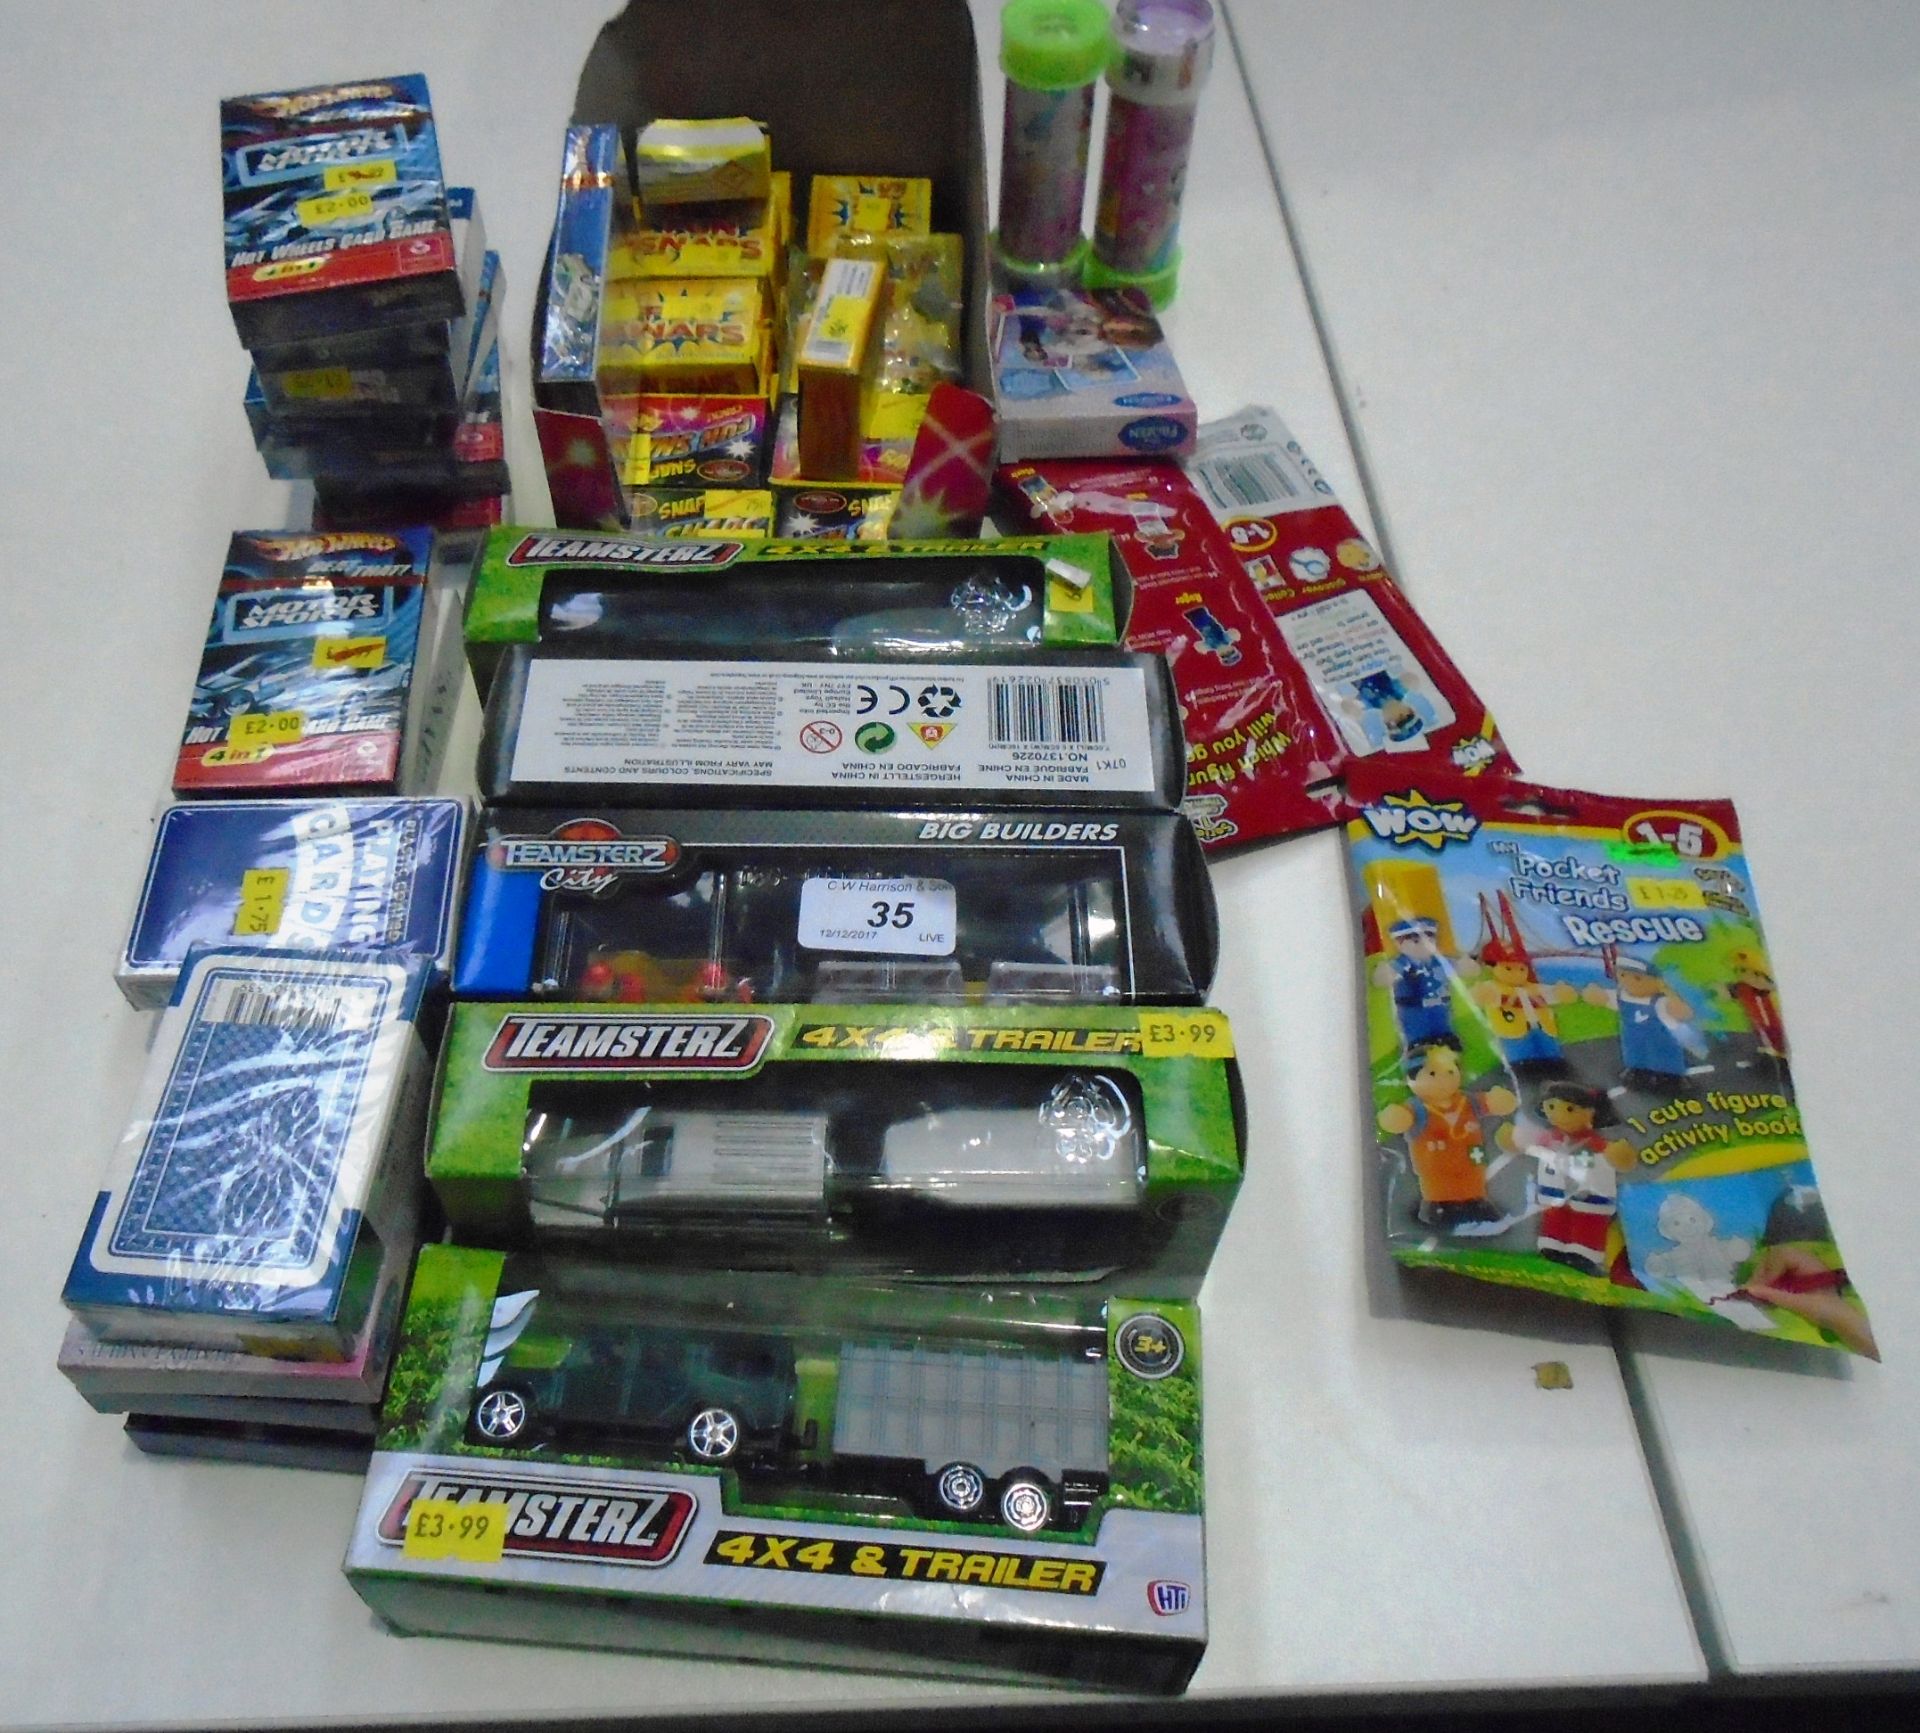 50 x assorted items - packs of Hot Wheels card games, Teamsterz 4 x 4 and trailer die cast vehicles,